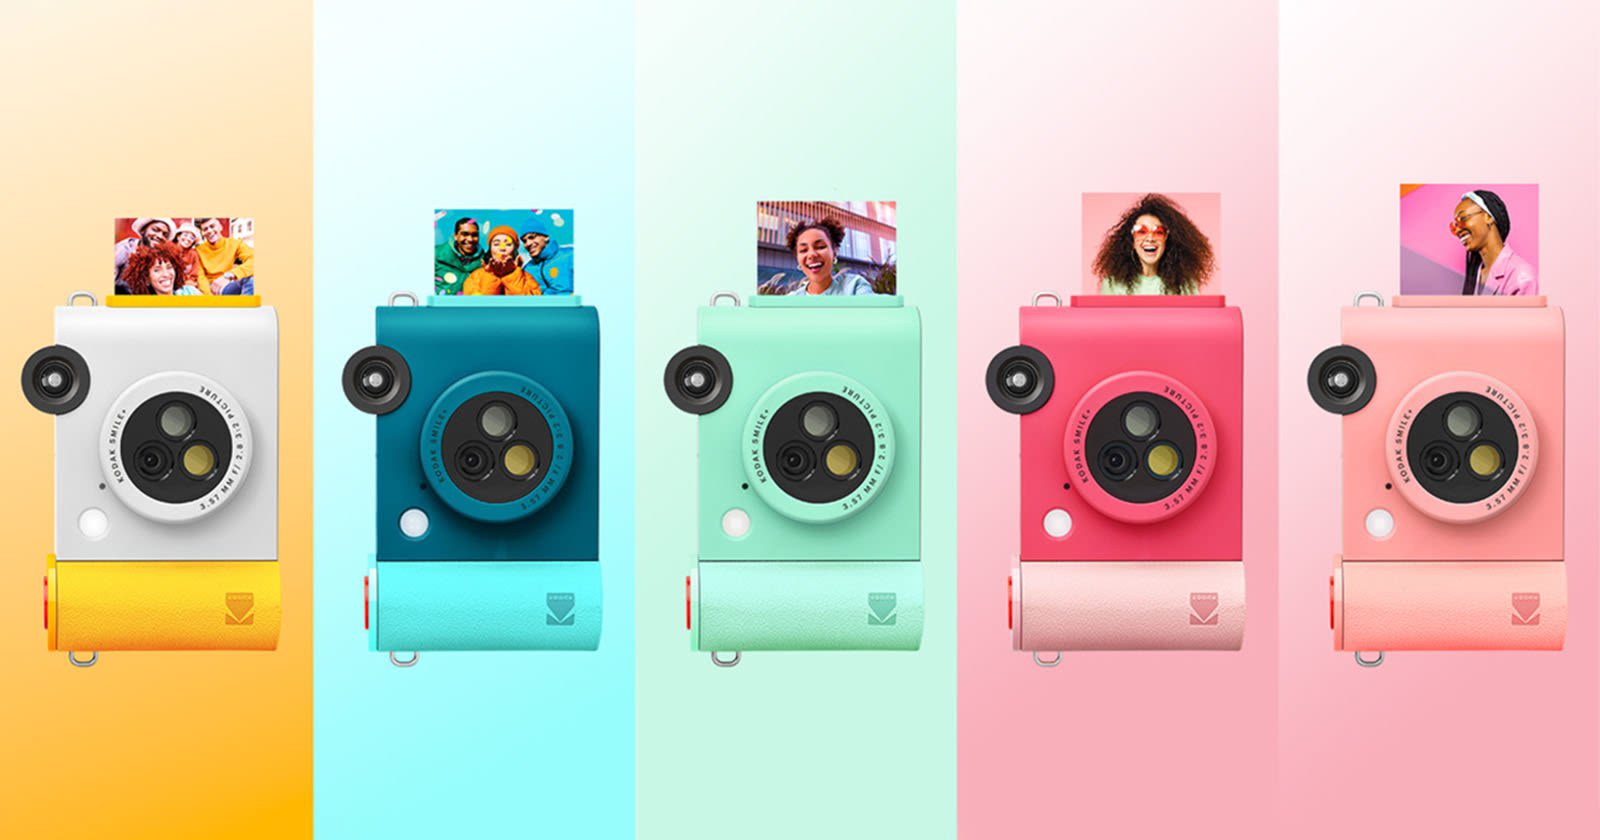 The New 'Kodak' Smile Plus Instant Camera May Instead Inspire Frowns